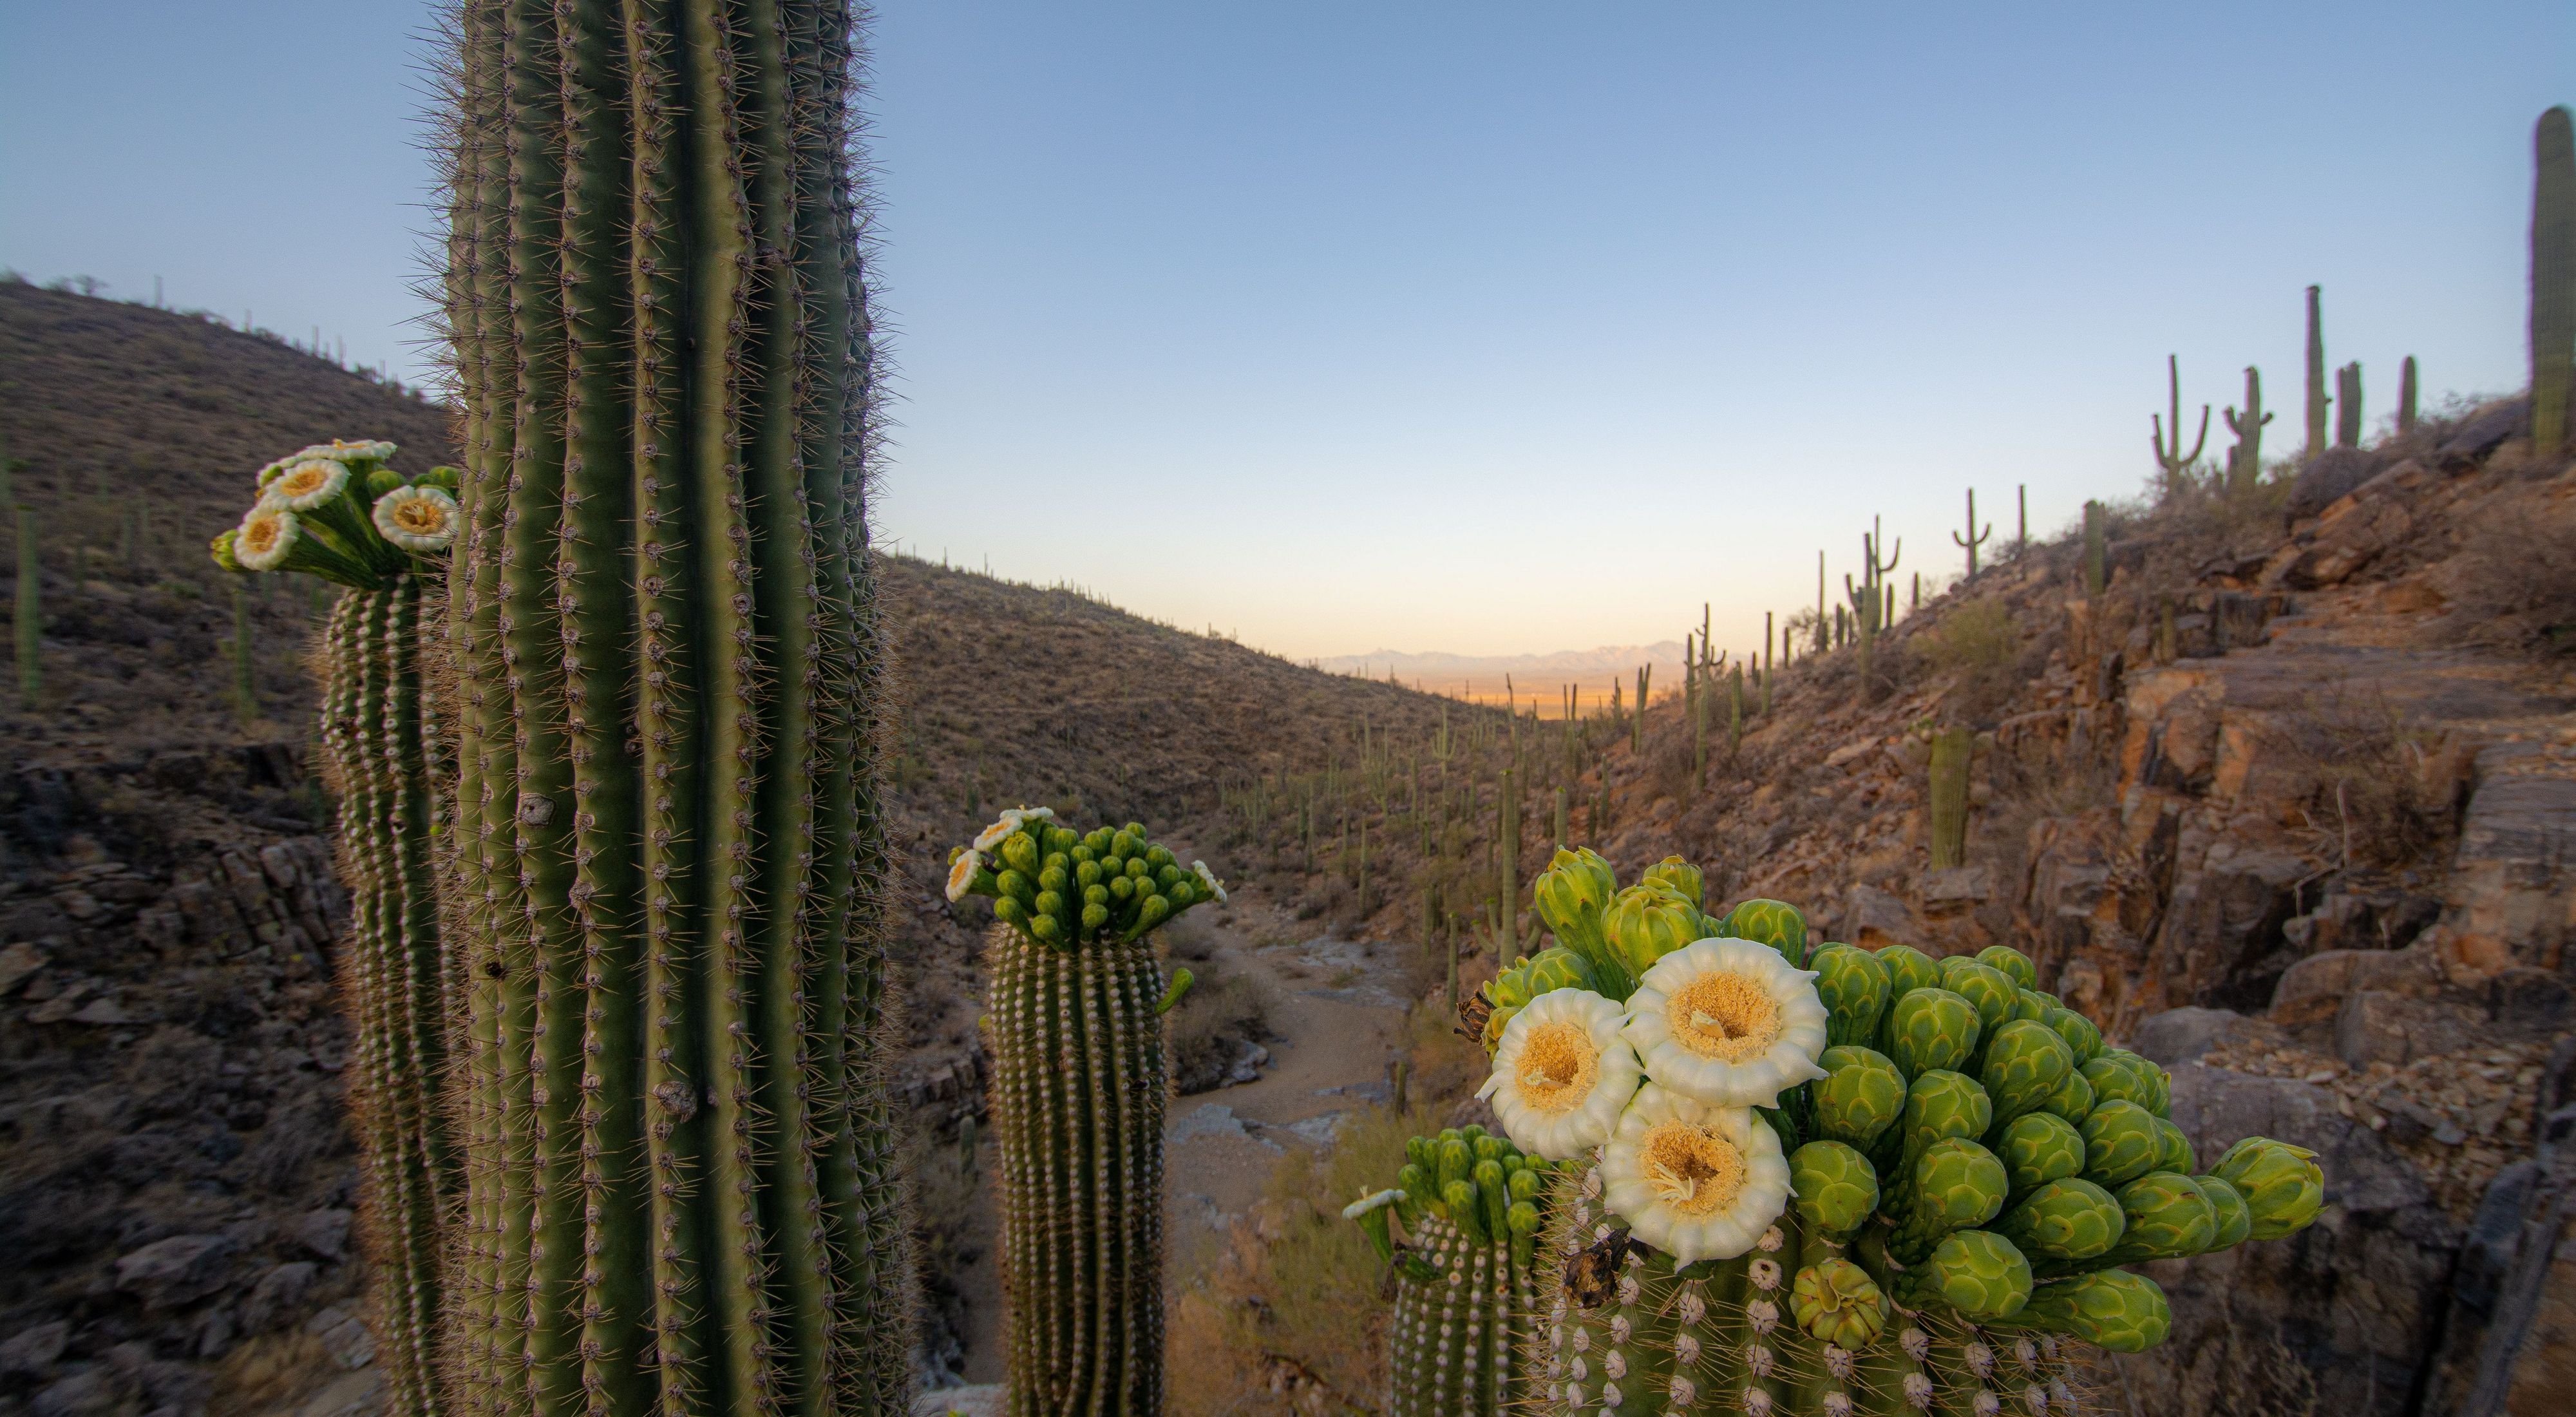 View of a mountain in pre-dawn light with saguaros in the background and several blooming saguaros in the foreground.